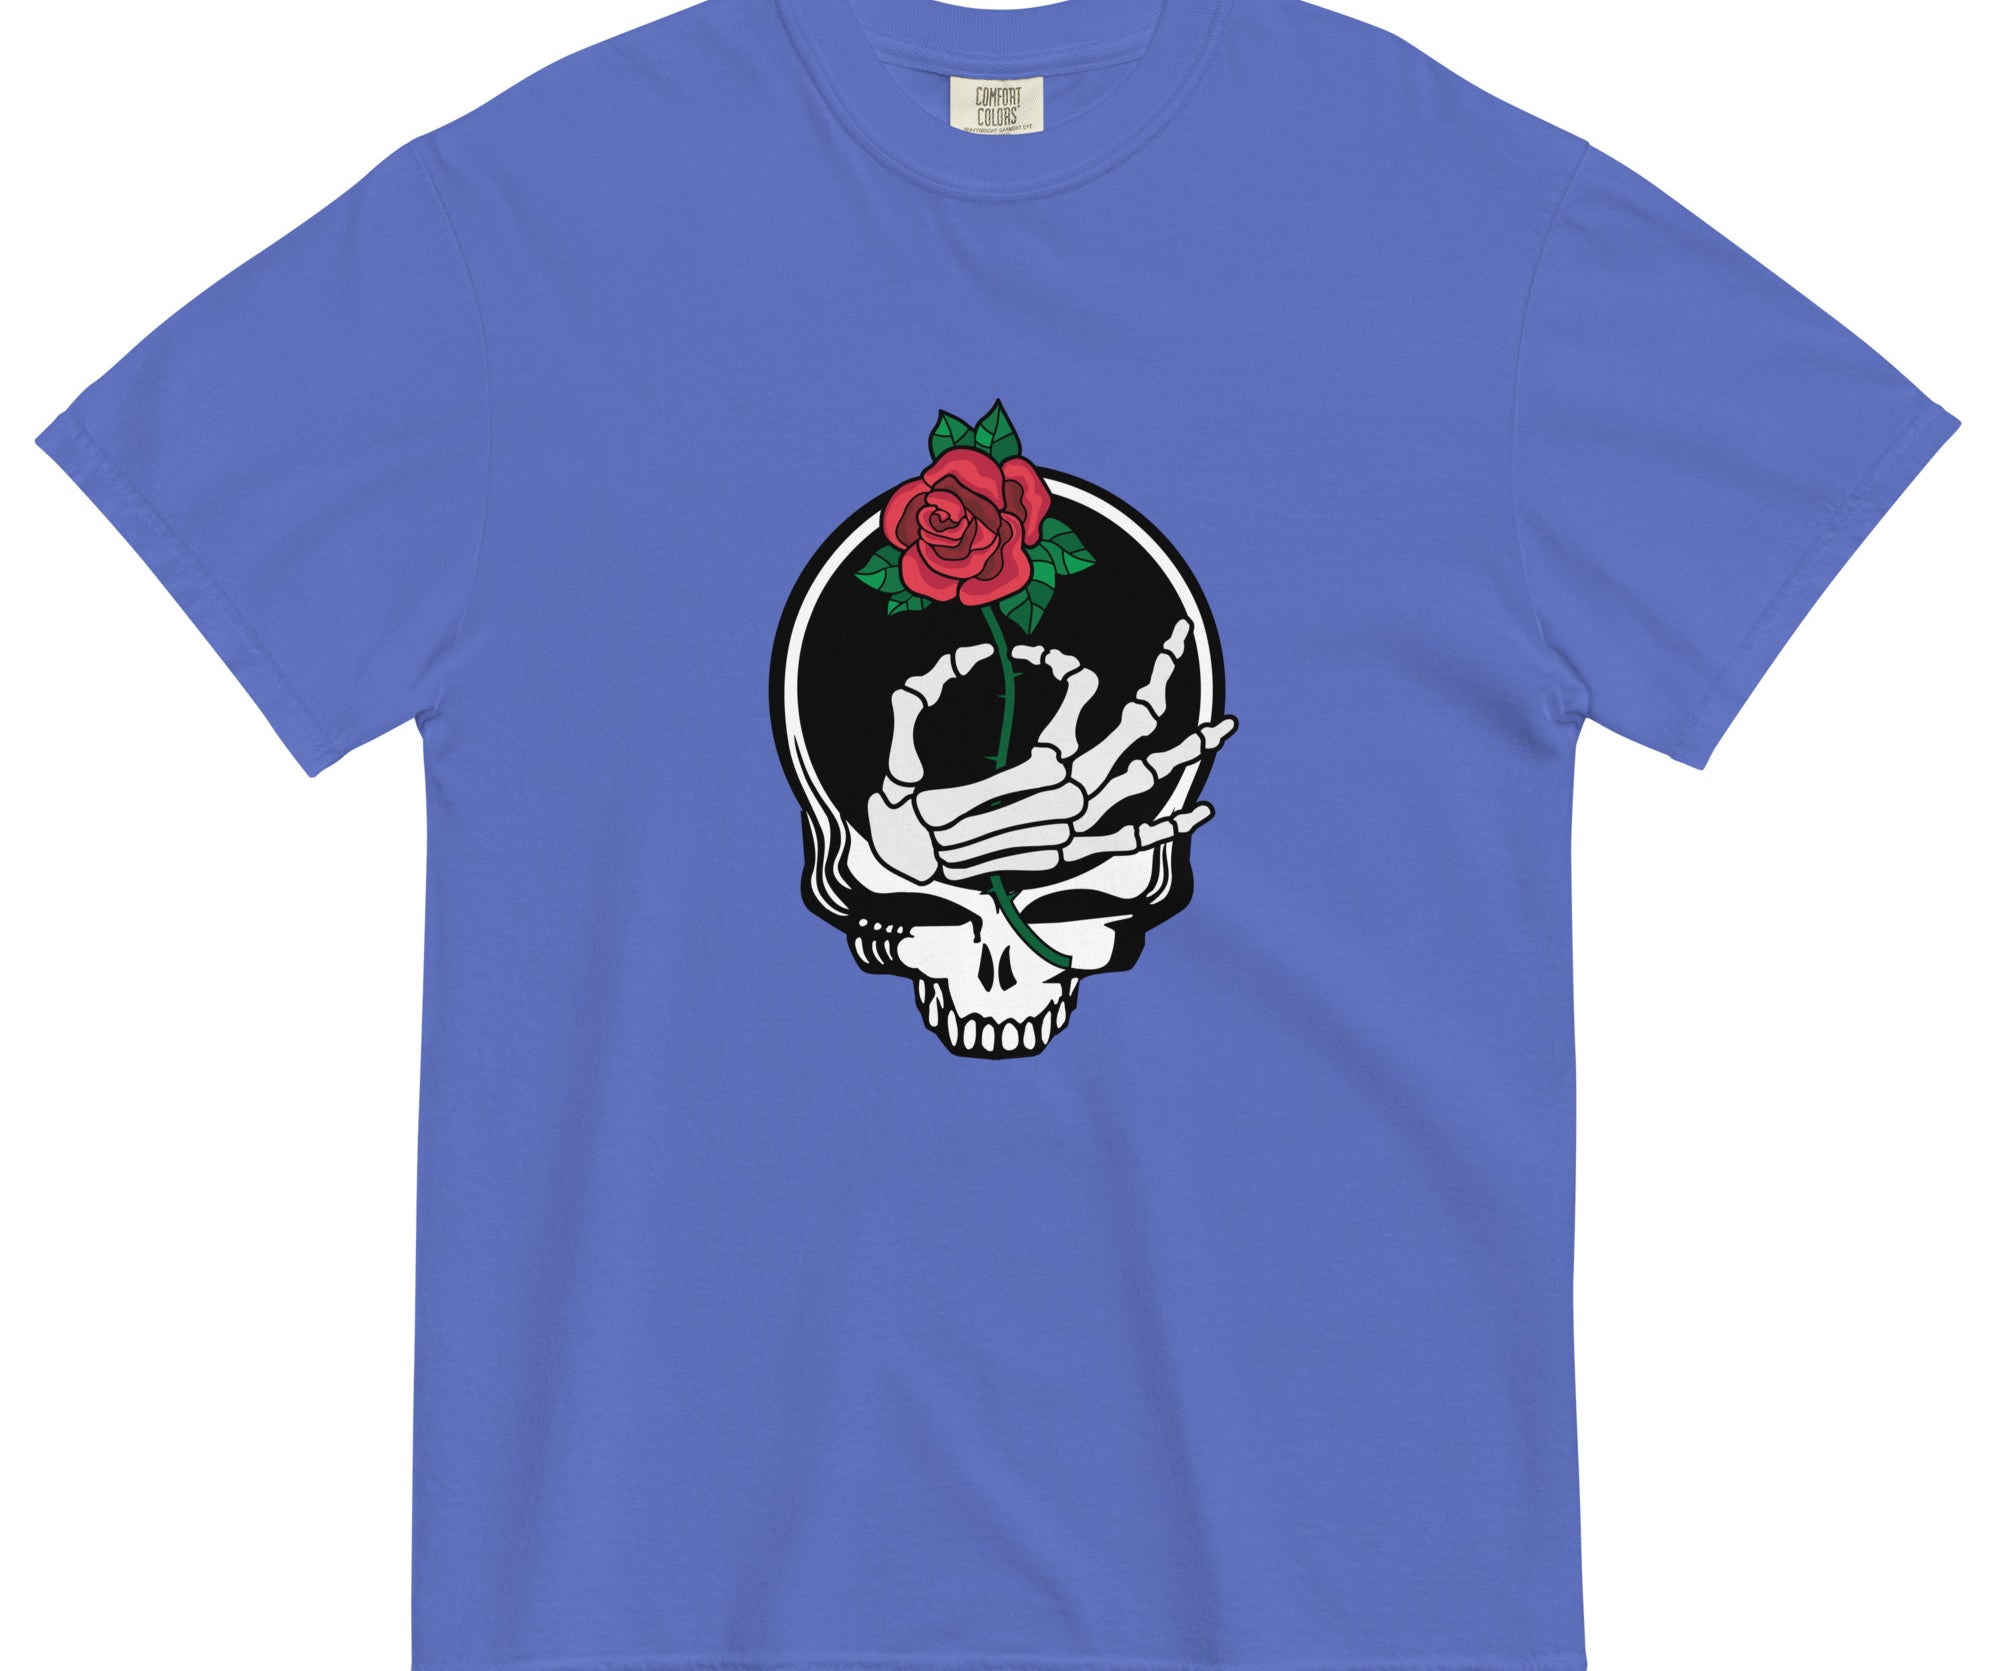 Grateful Dead | Pigment Dye Oversize Cotton Tee | A Rose For You Dead Head Canoe - Section 119